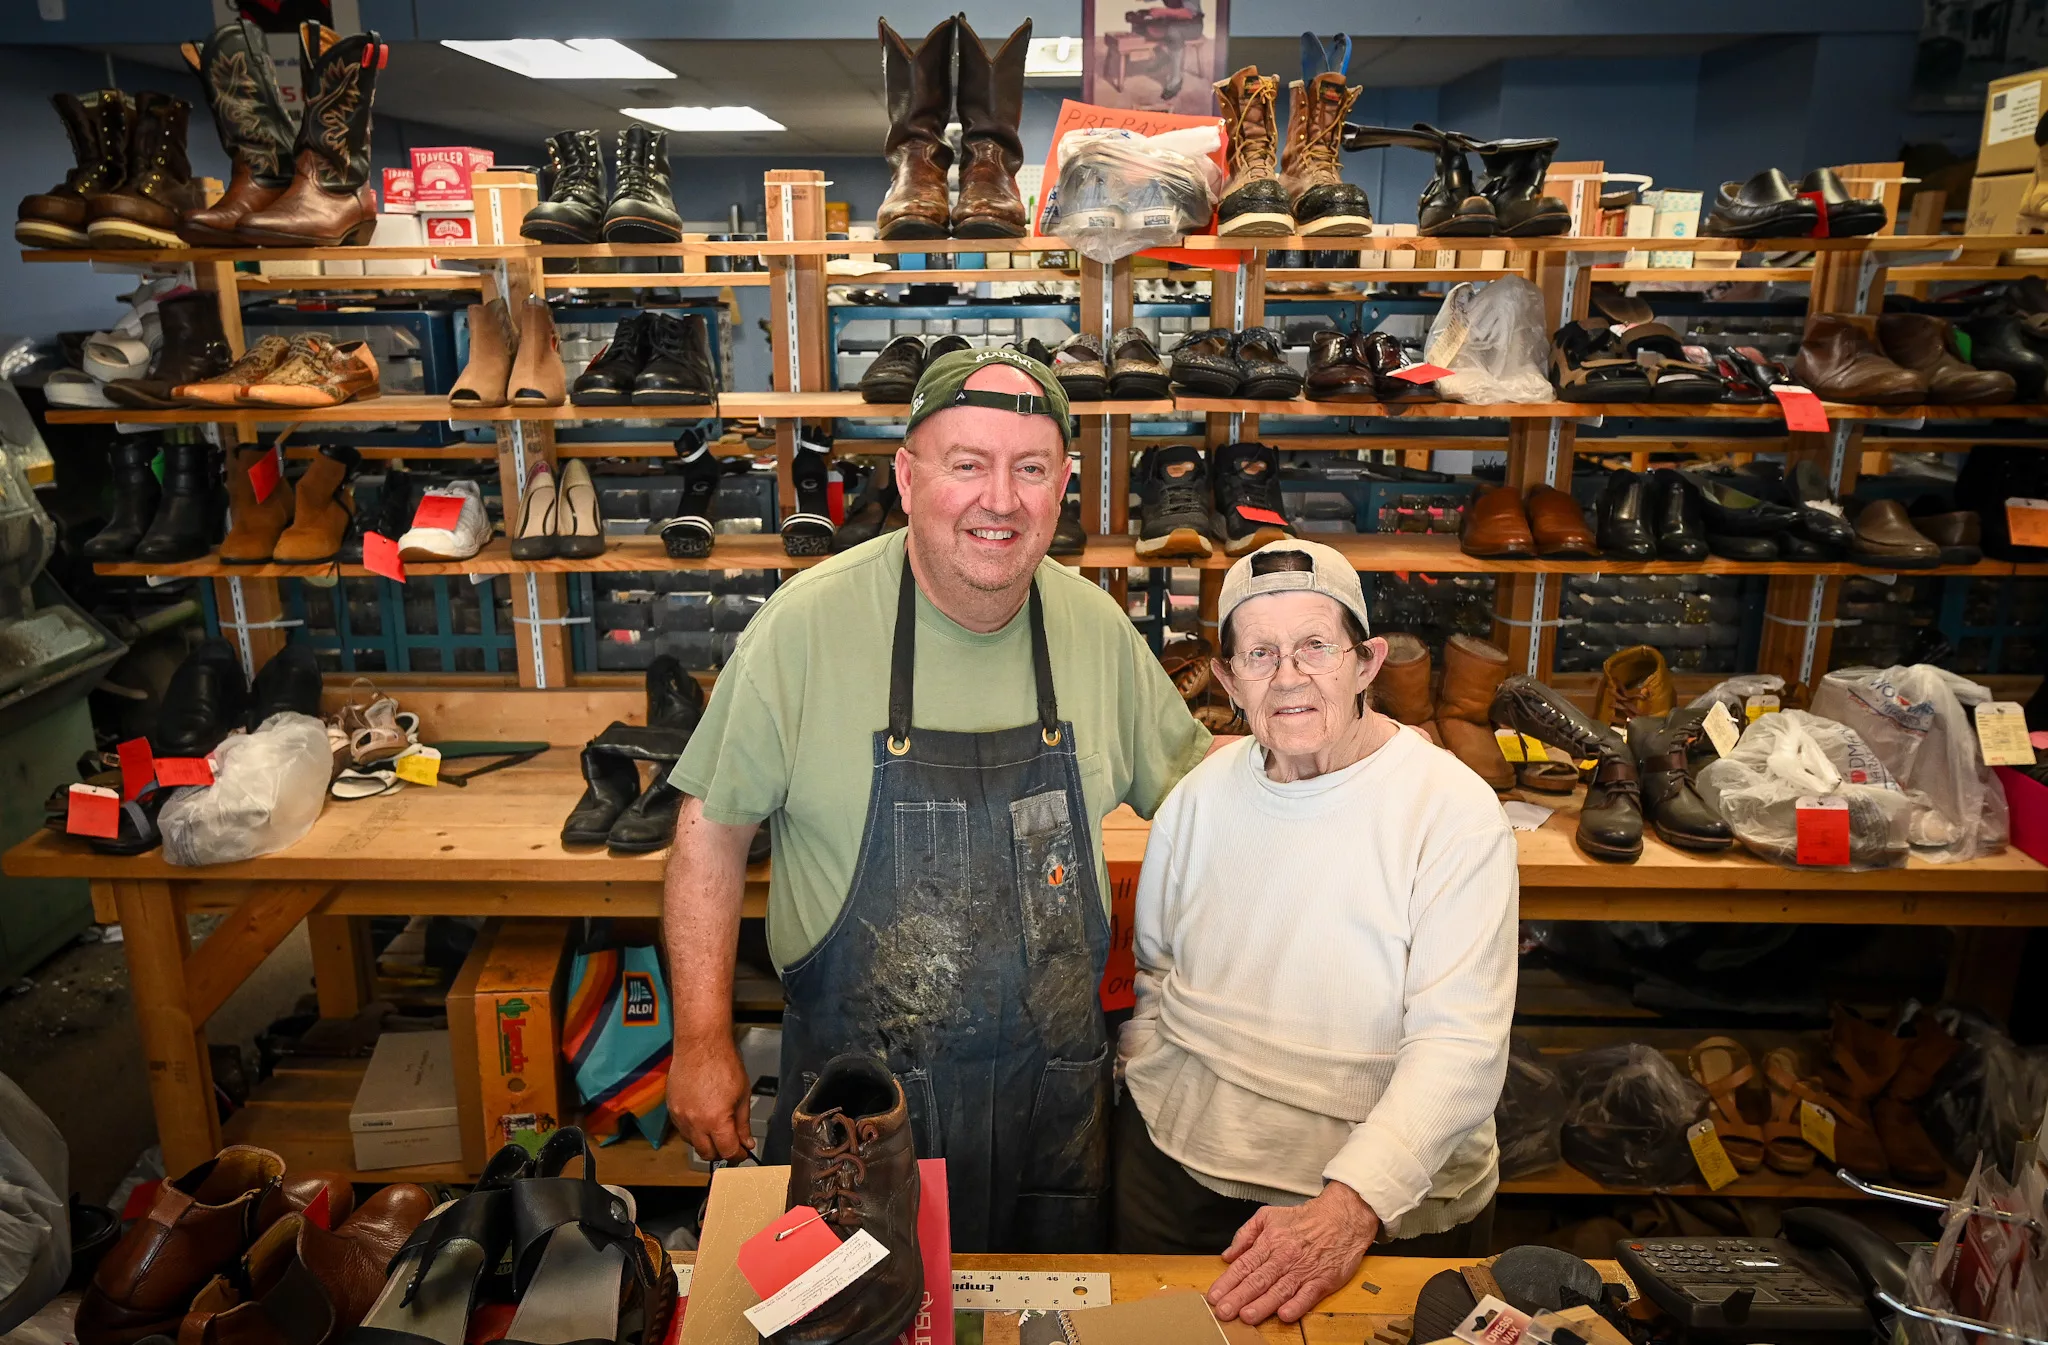 Asheville Shoe Repair - Based in Downtown, Asheville